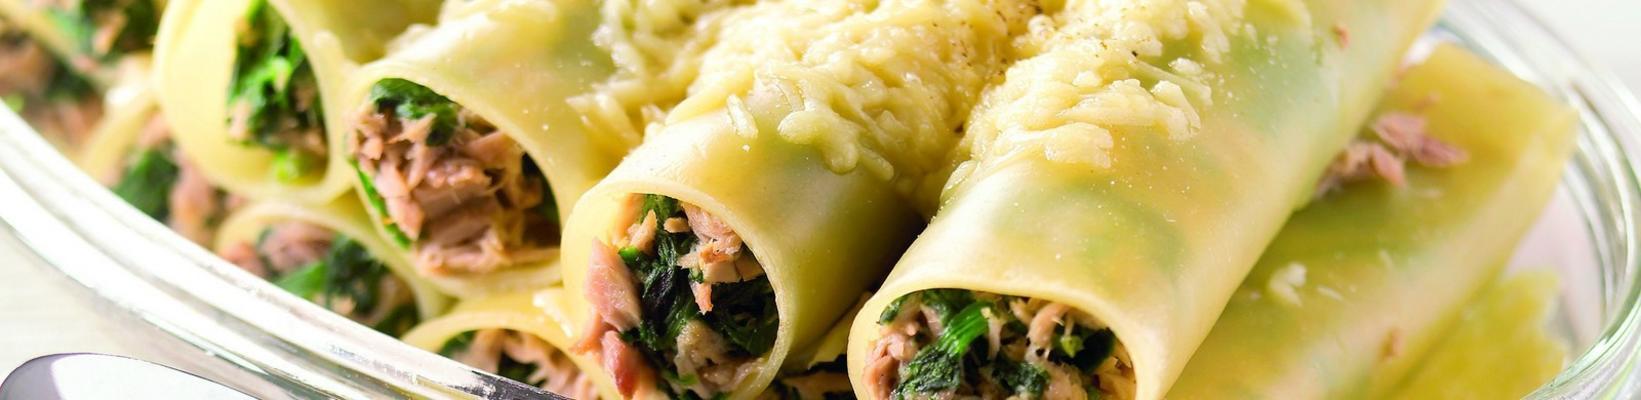 Cannelloni with Tuna and Spinach